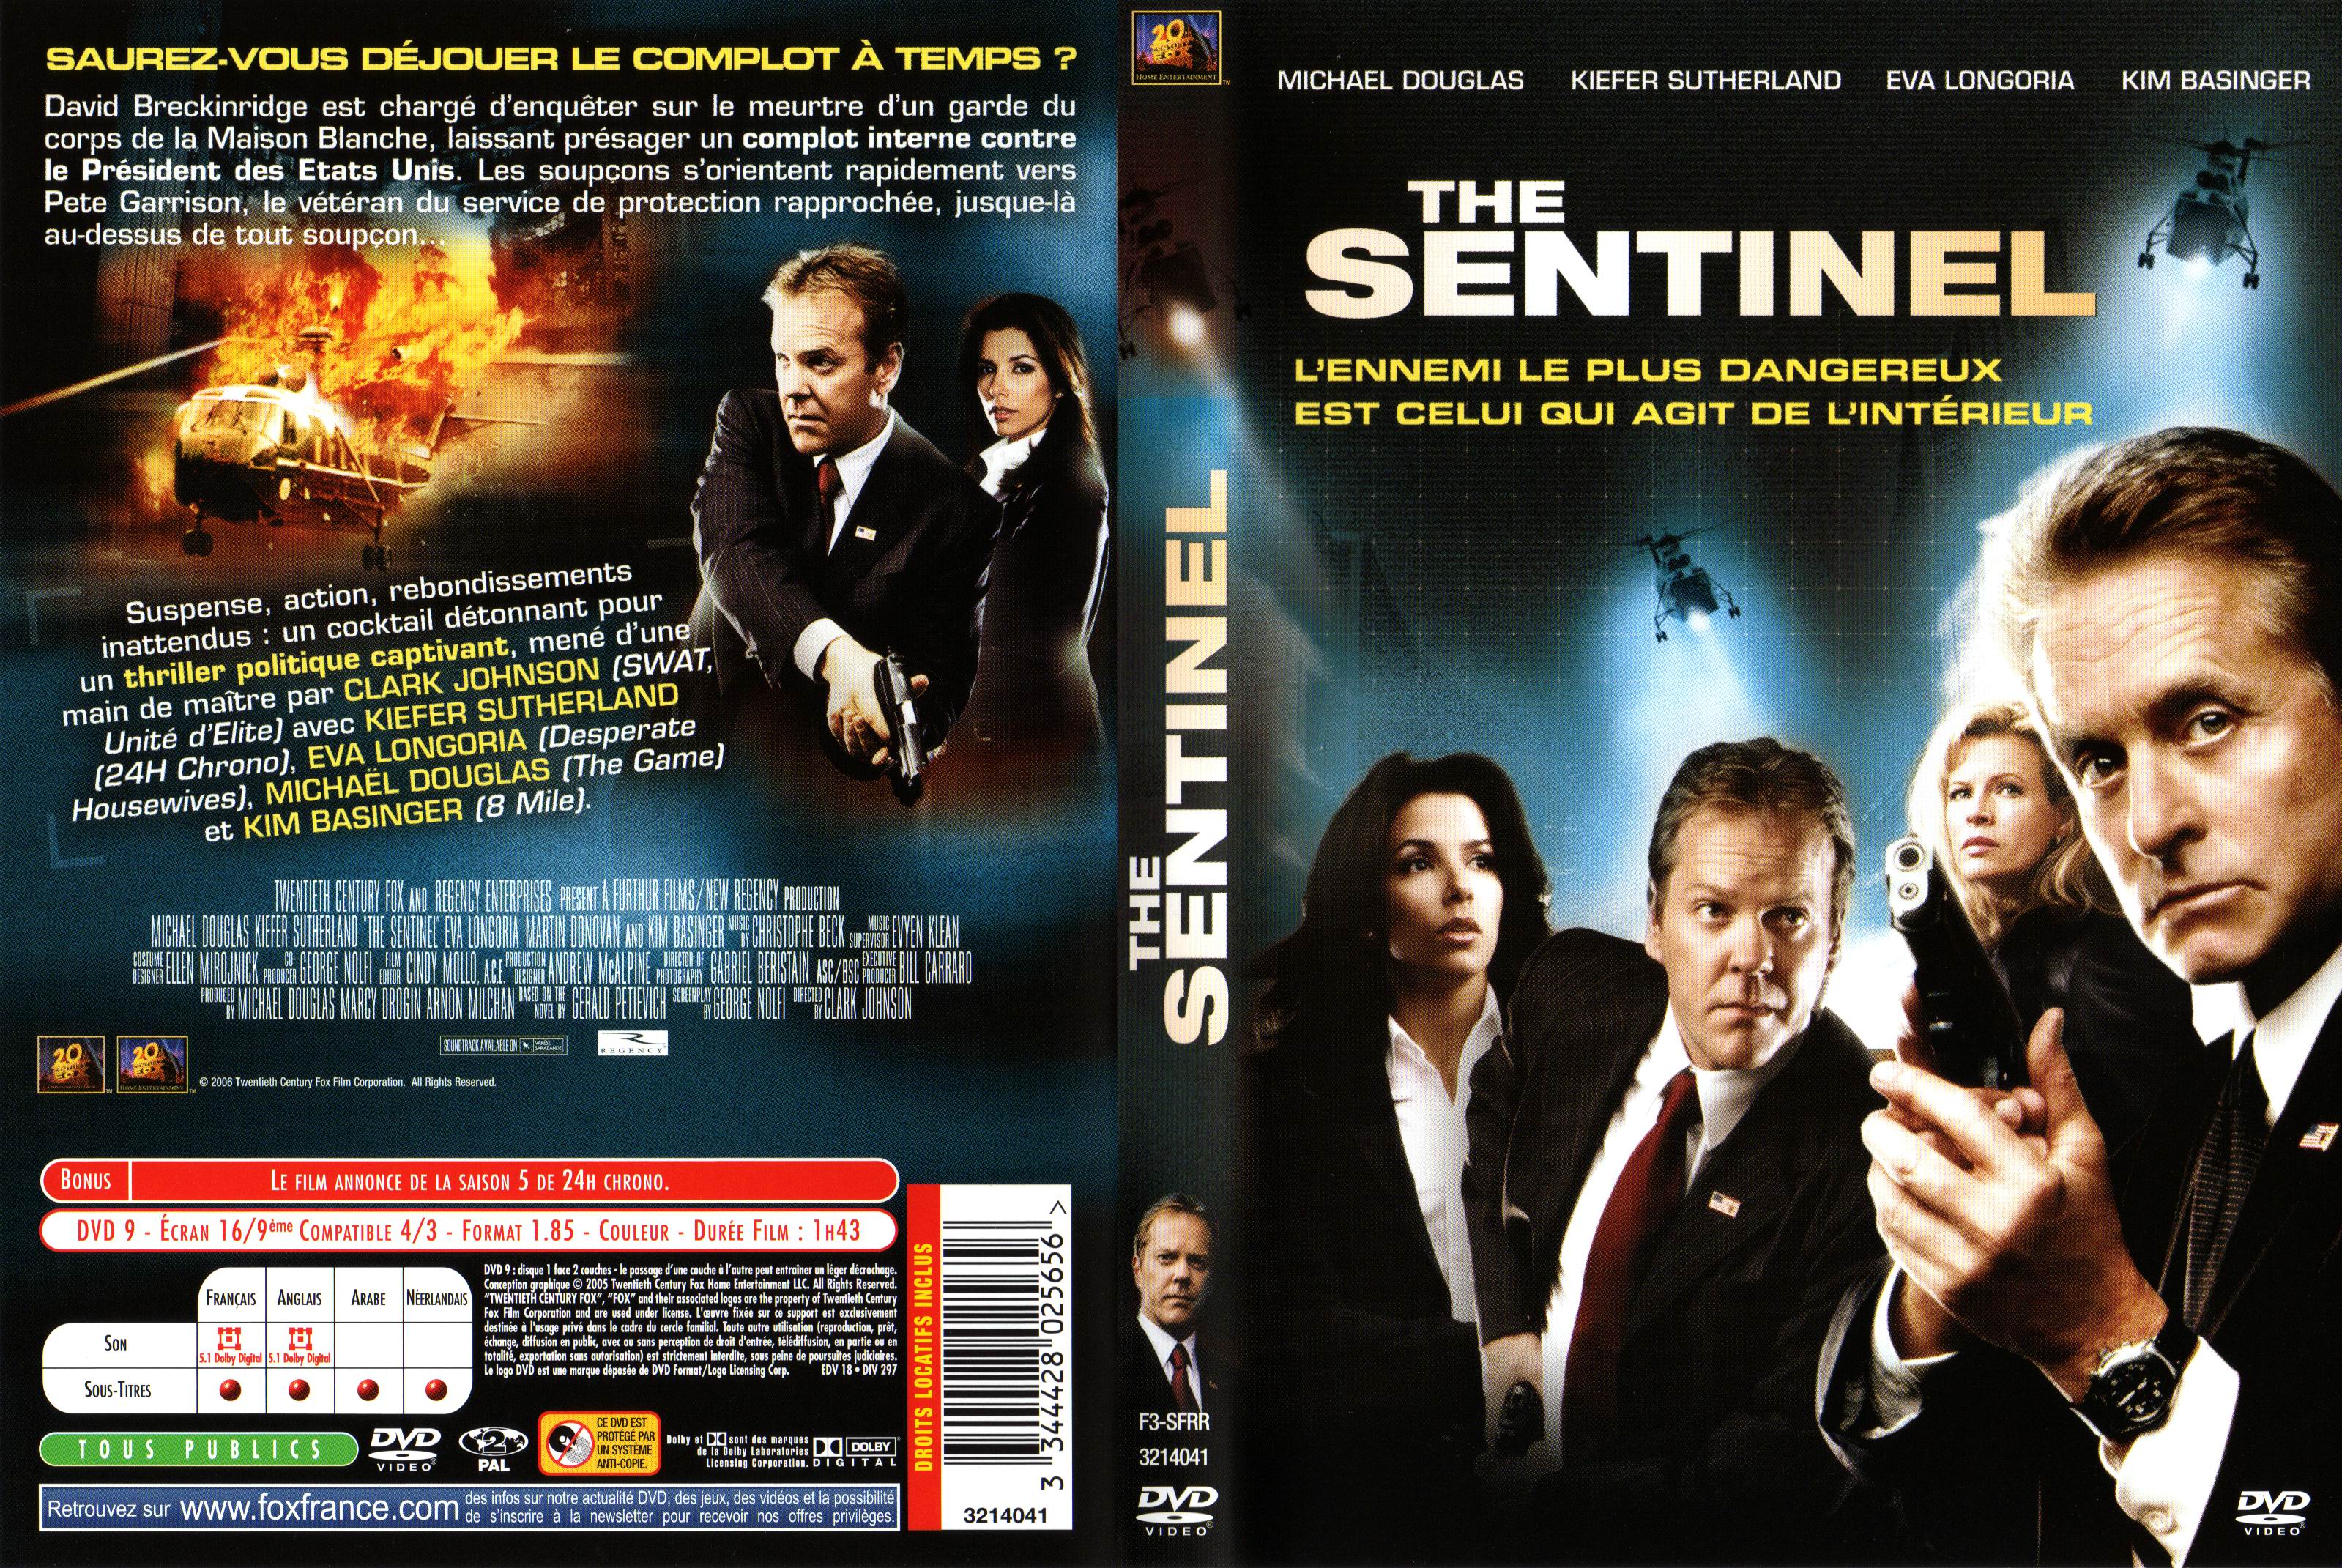 Jaquette DVD The sentinel